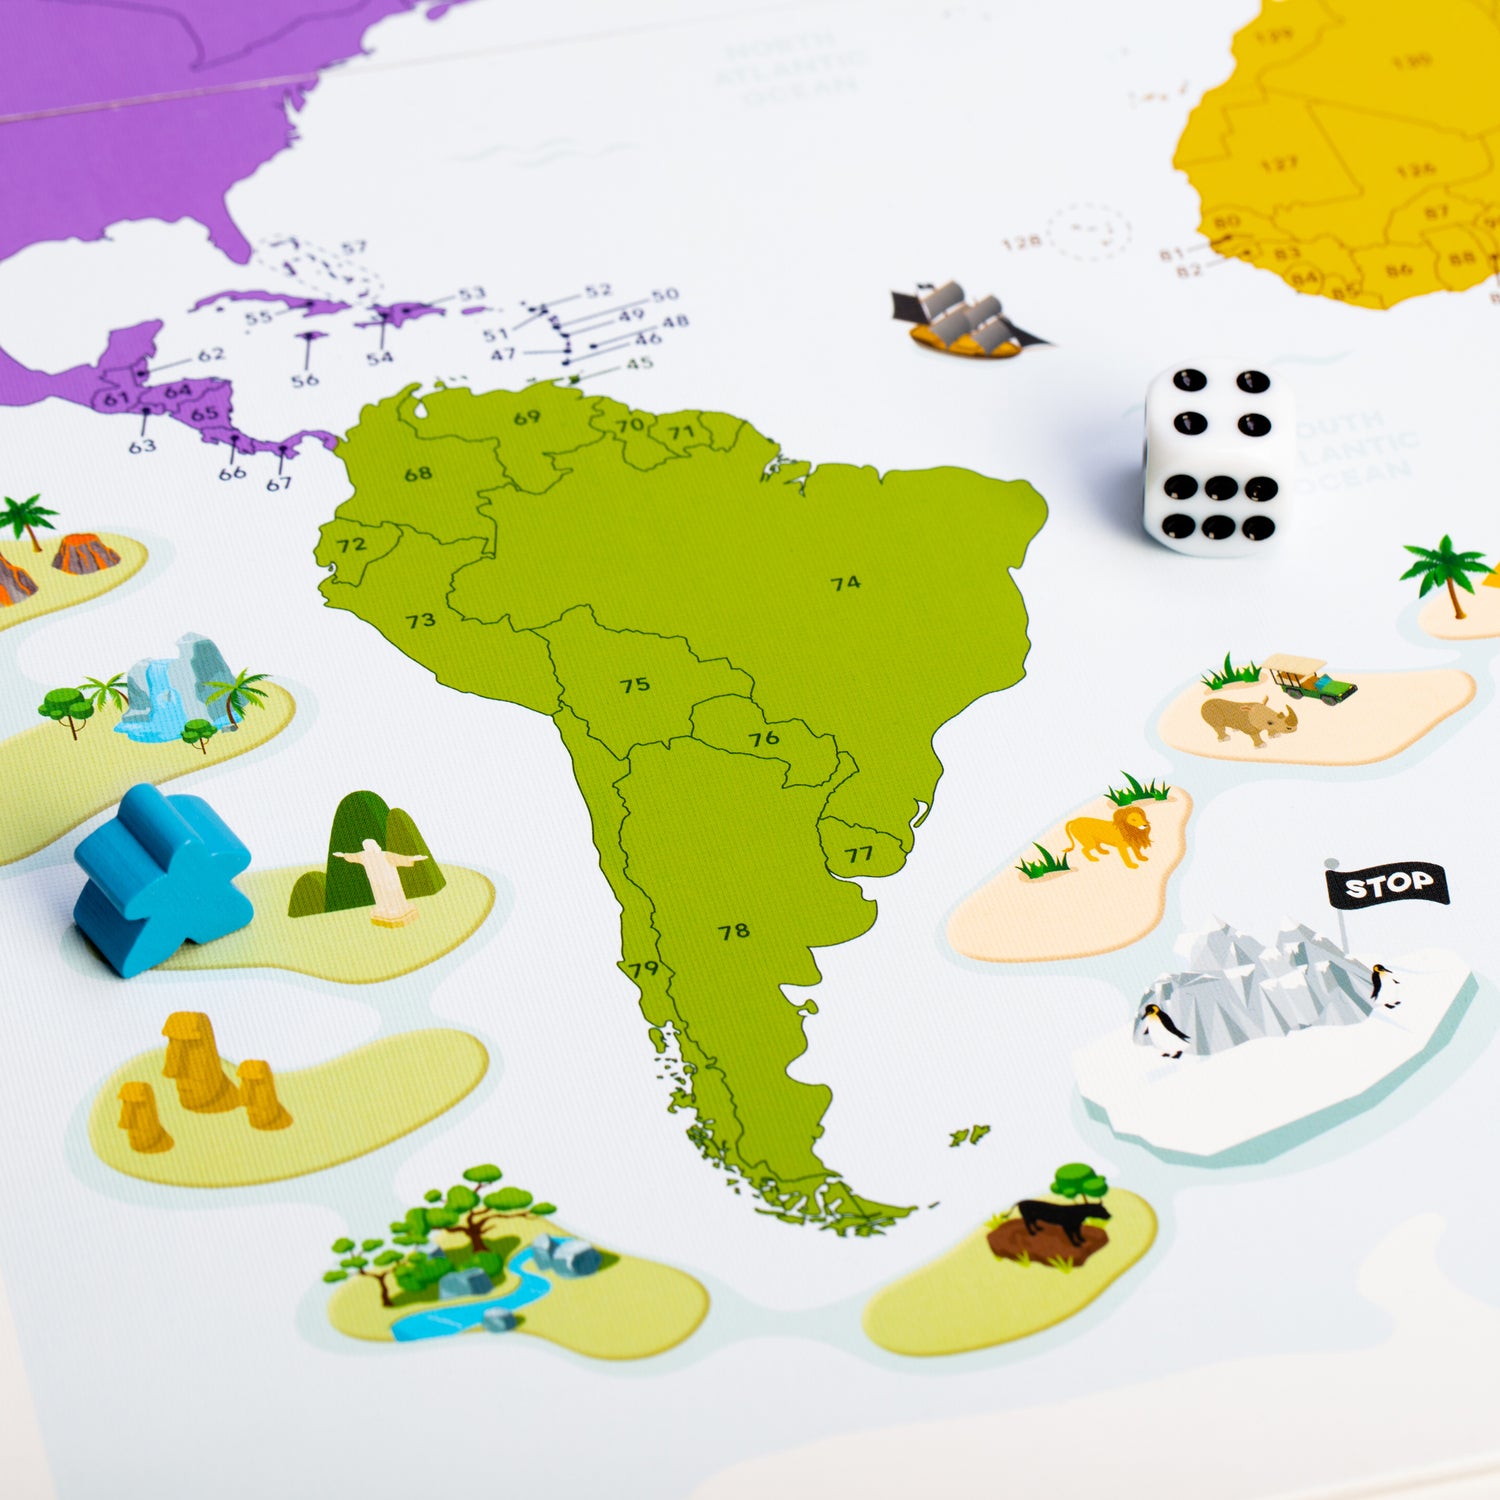 If your kid likes science gifts he will like this road trip ready geography board game for teens.